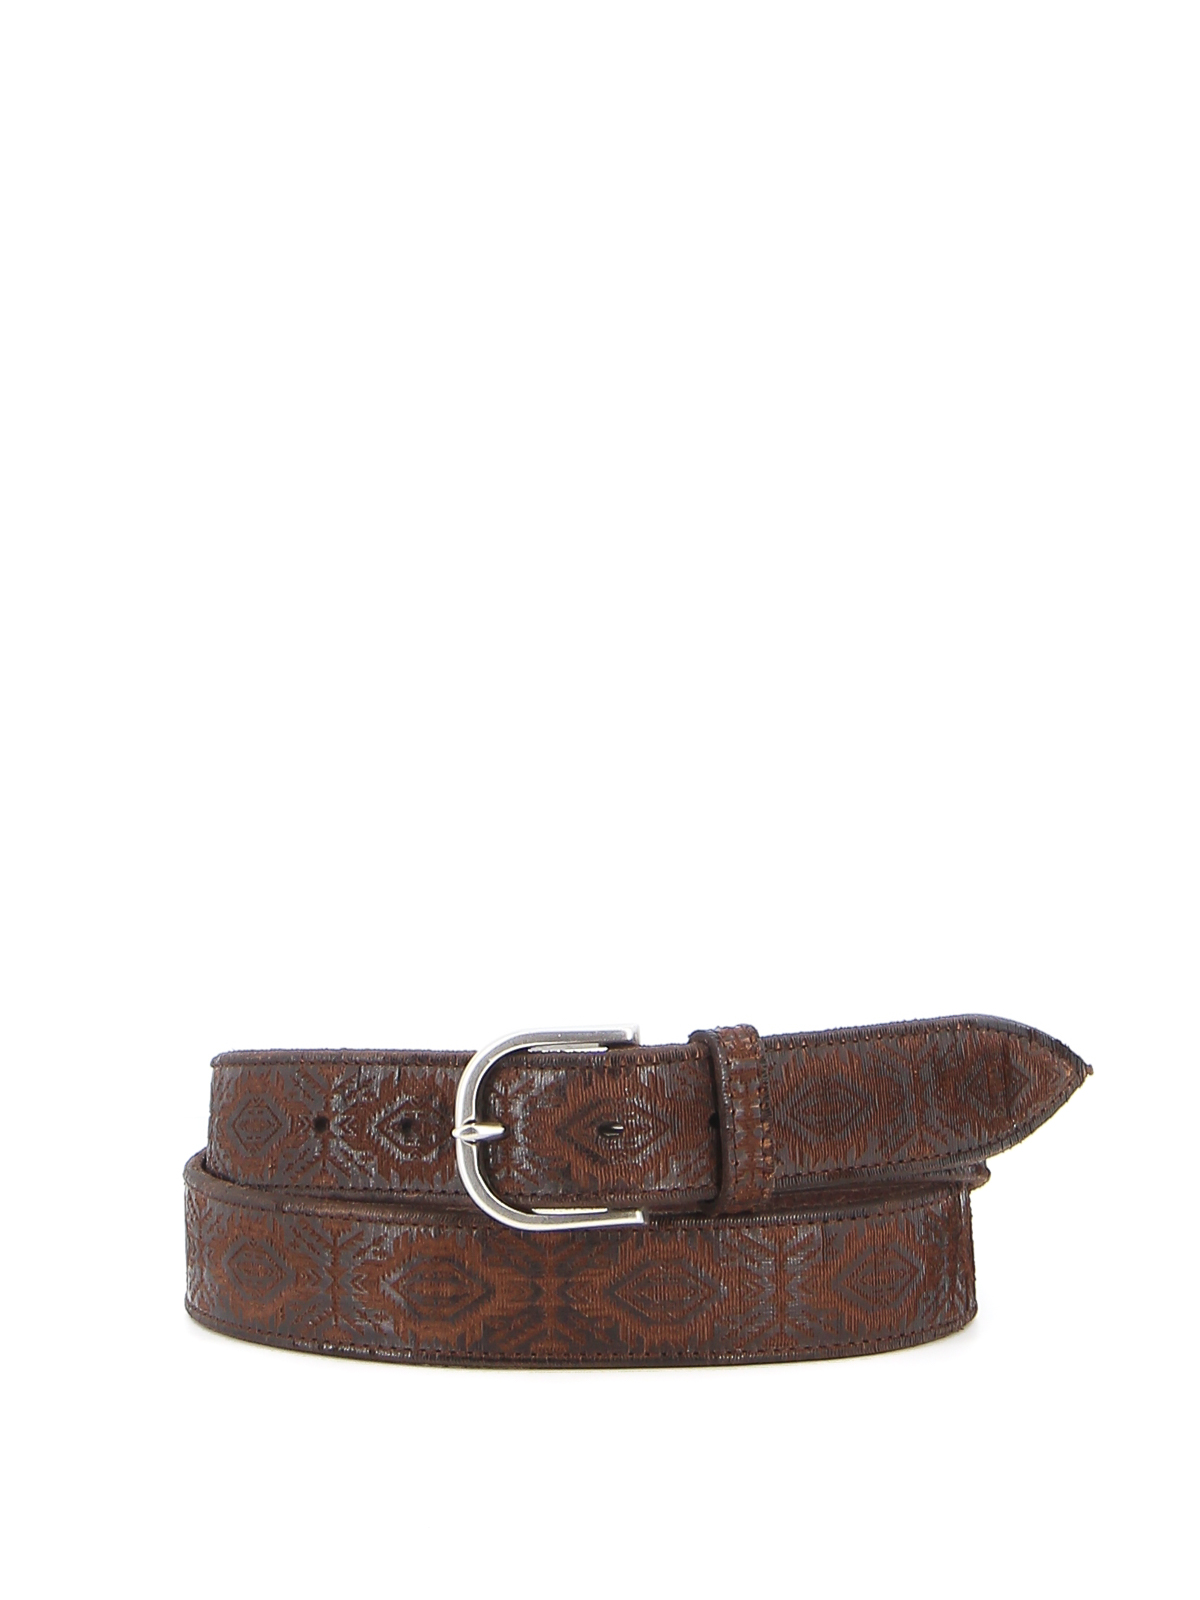 Orciani Jaquard Effect Leather Belt In Brown